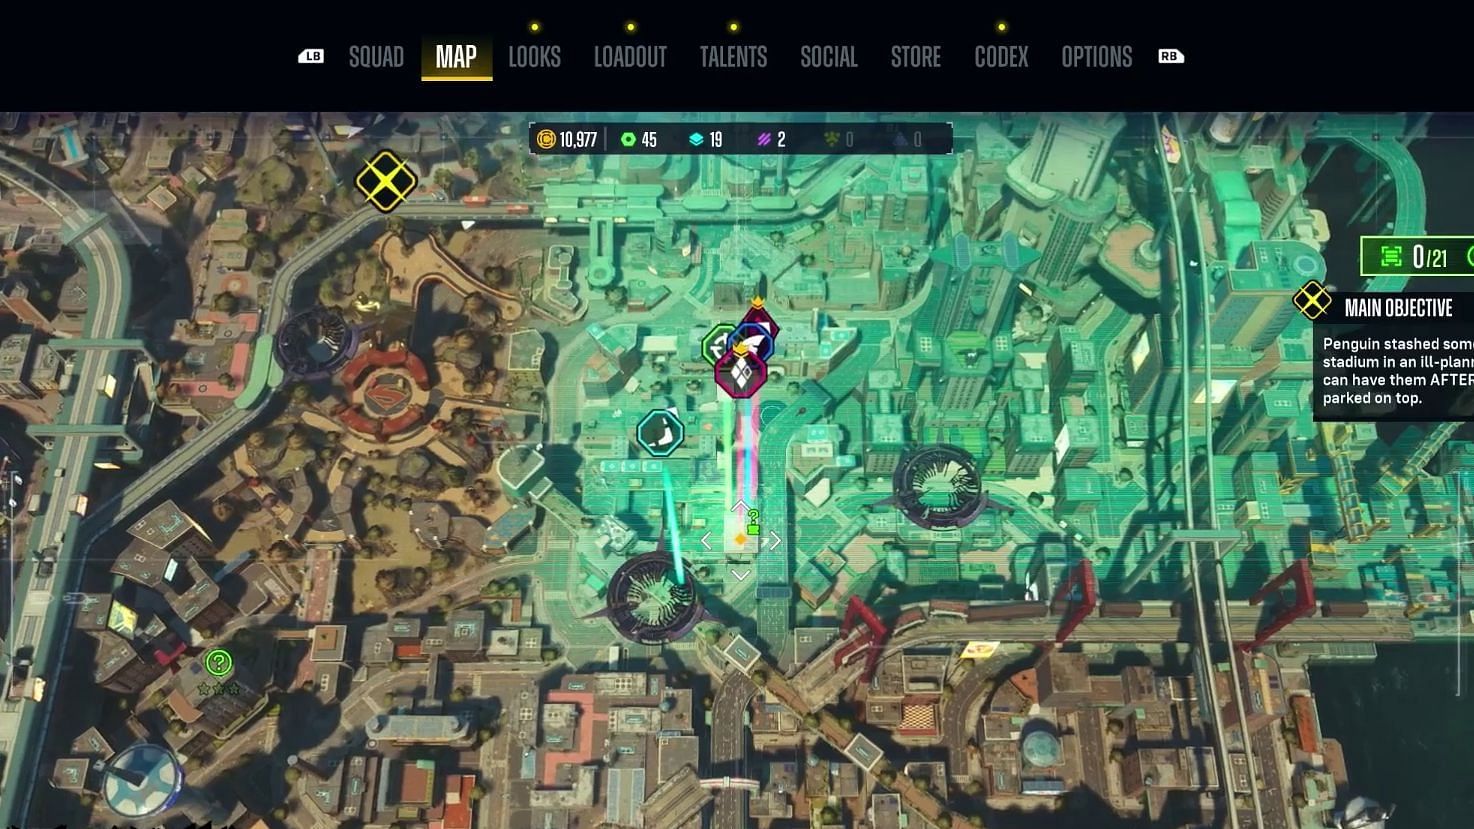 Riddler Trophy number 5 can be found in Midtown (Image via YouTube/Pixelz)